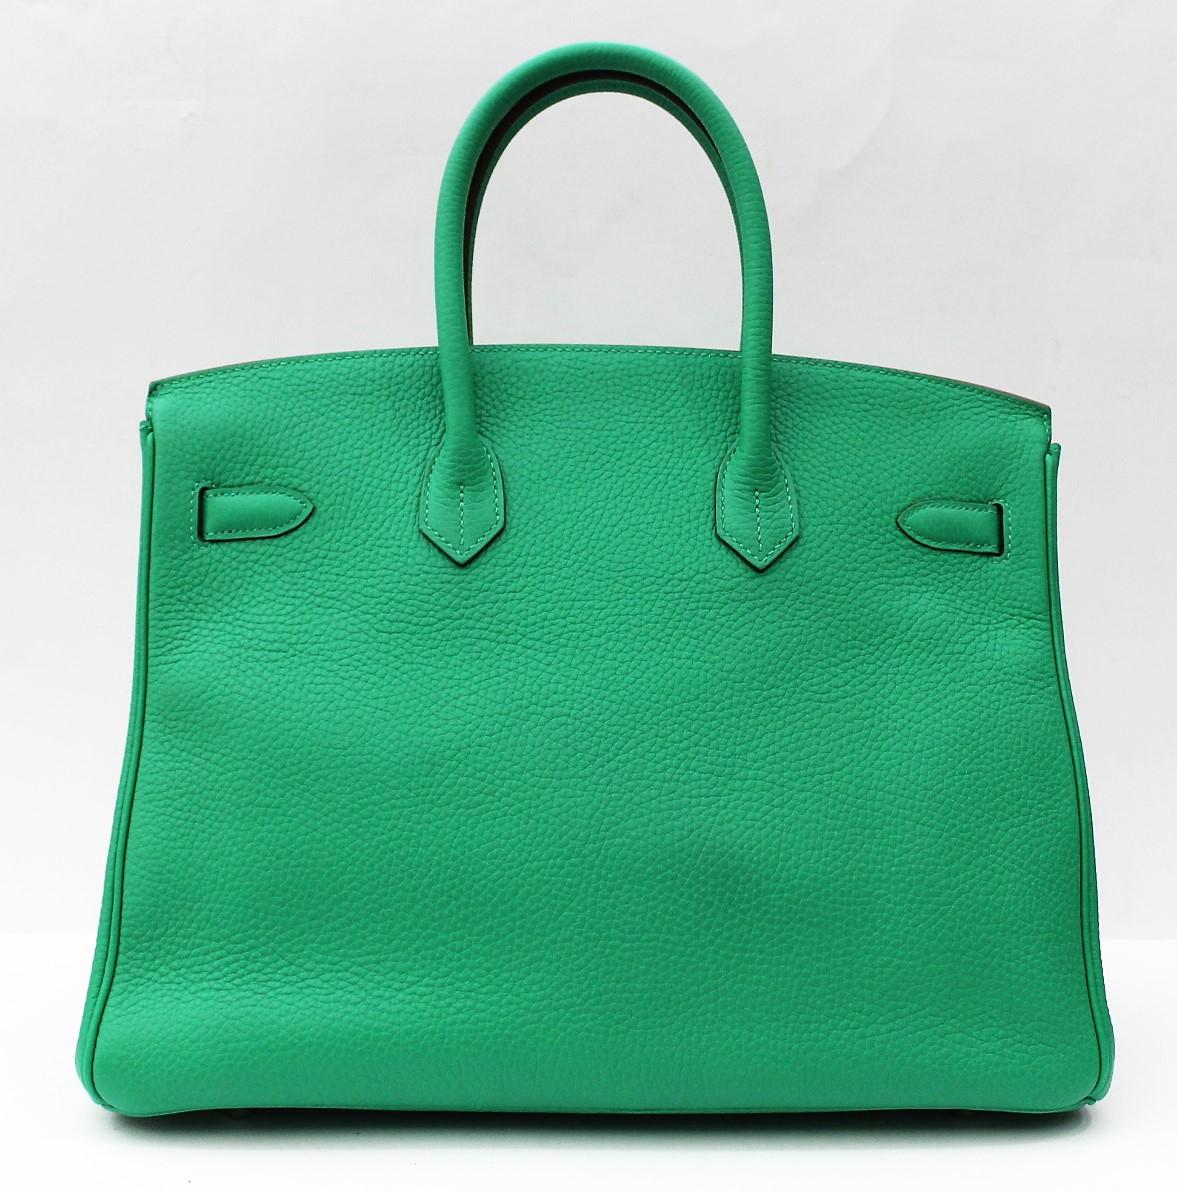 Birkin 35 in Menthe Green. Crafted in spectacular Taurillon Clemence Leather, this exceptional piece is in a beautiful shade of bright Mint Green accentuated with a Silver Palladium Hardware.
Protective plastics
Year 2012 
Original Dustbag